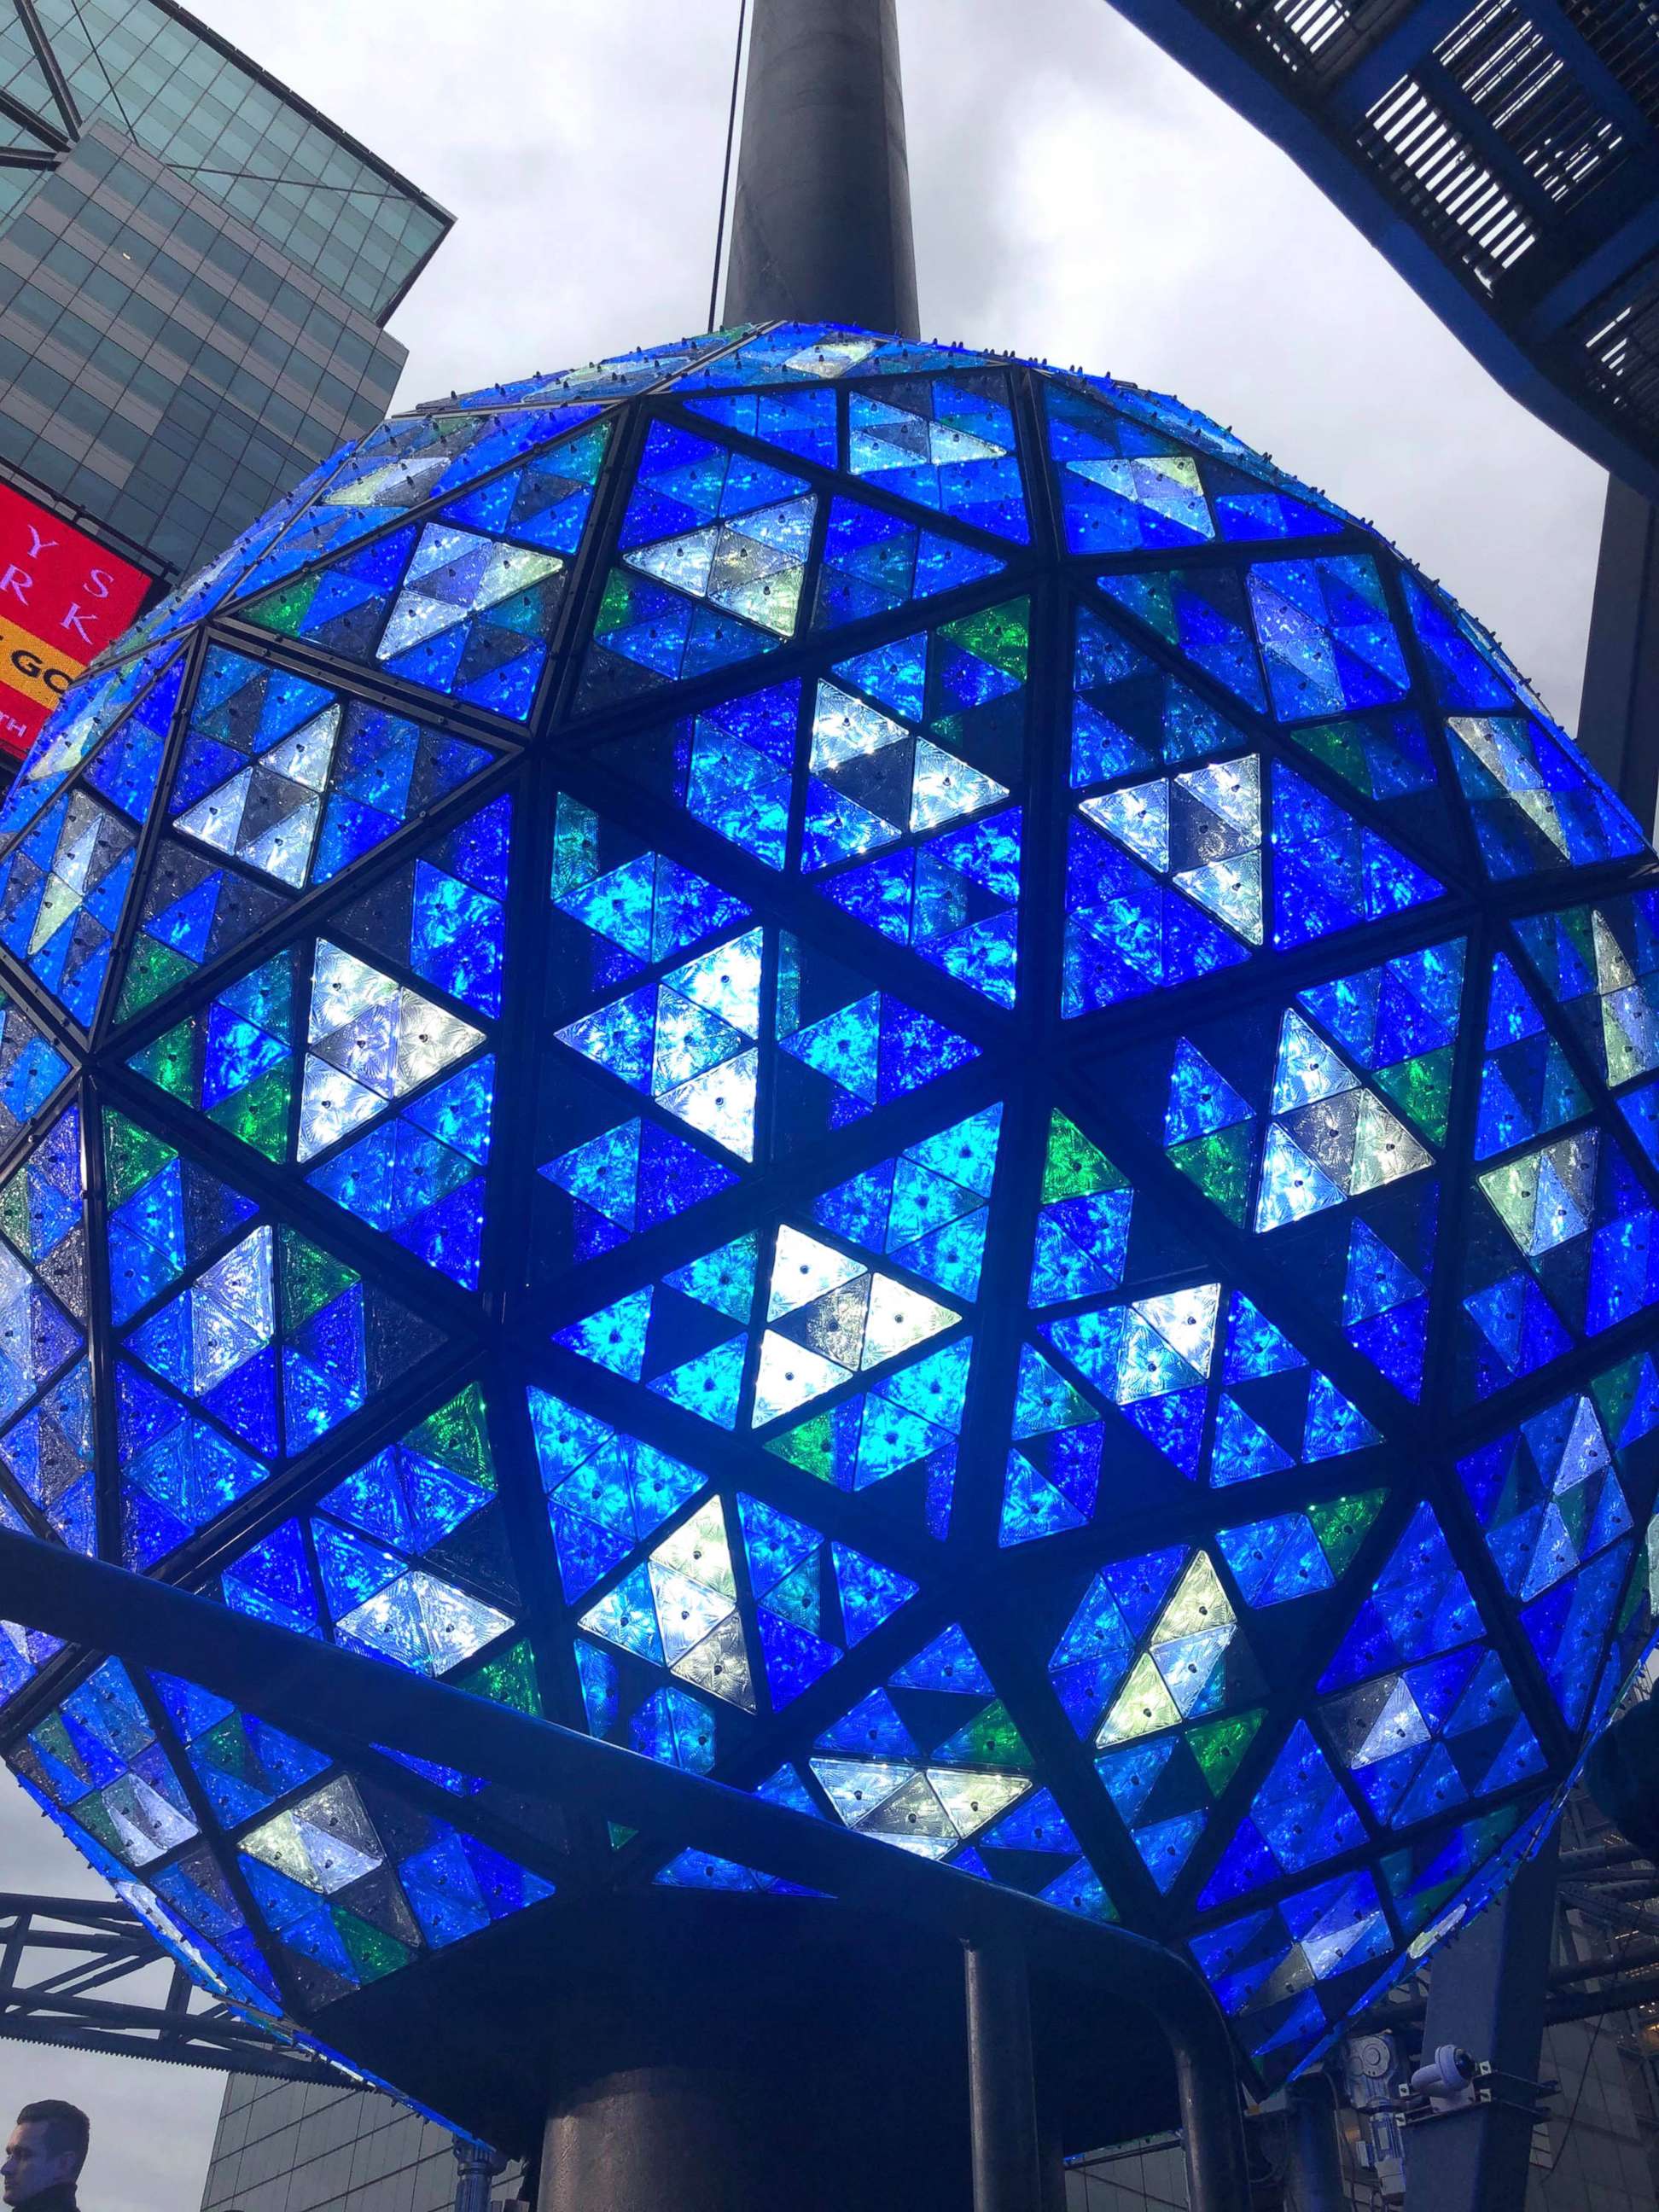 PHOTO: The Waterford Ball is illuminated with 32,265 LEDs and is capable of displaying billions of patterns.